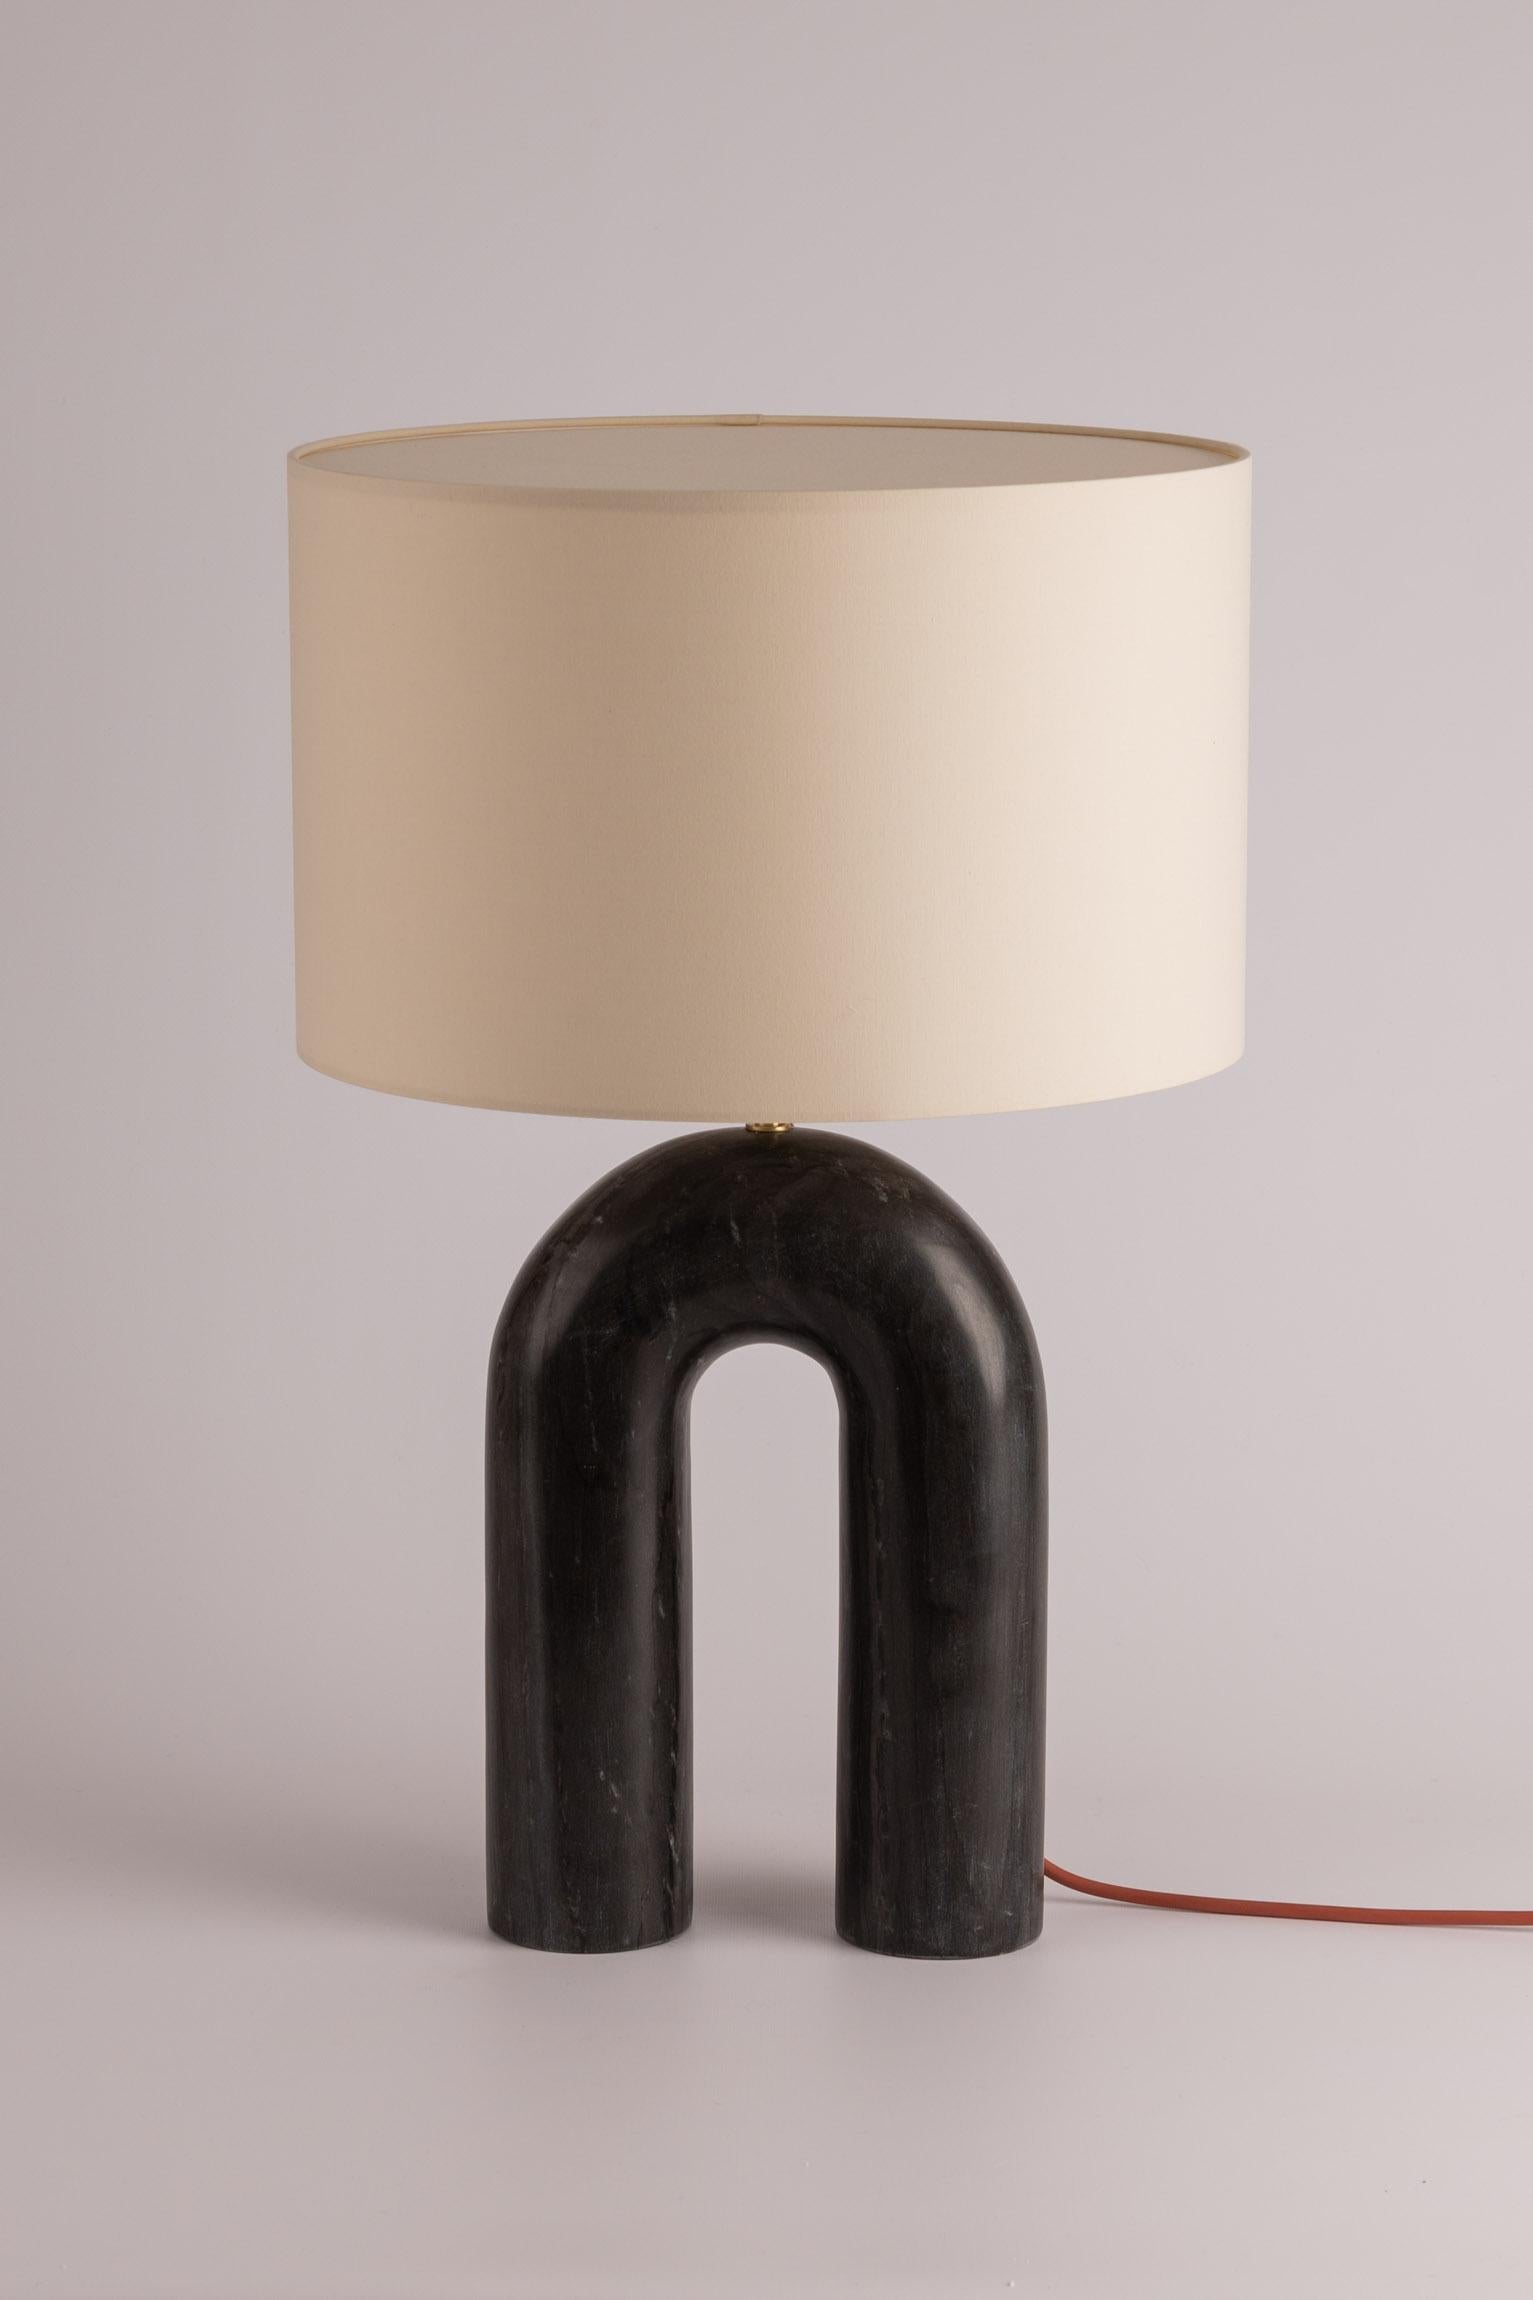 Black Marble Arko Table Lamp by Simone & Marcel
Dimensions: Ø 40 x H 67 cm.
Materials: Cotton lampshade and black marble.

Also available in different marbles and ceramics. Custom options available on request. Please contact us. 

All our lamps can